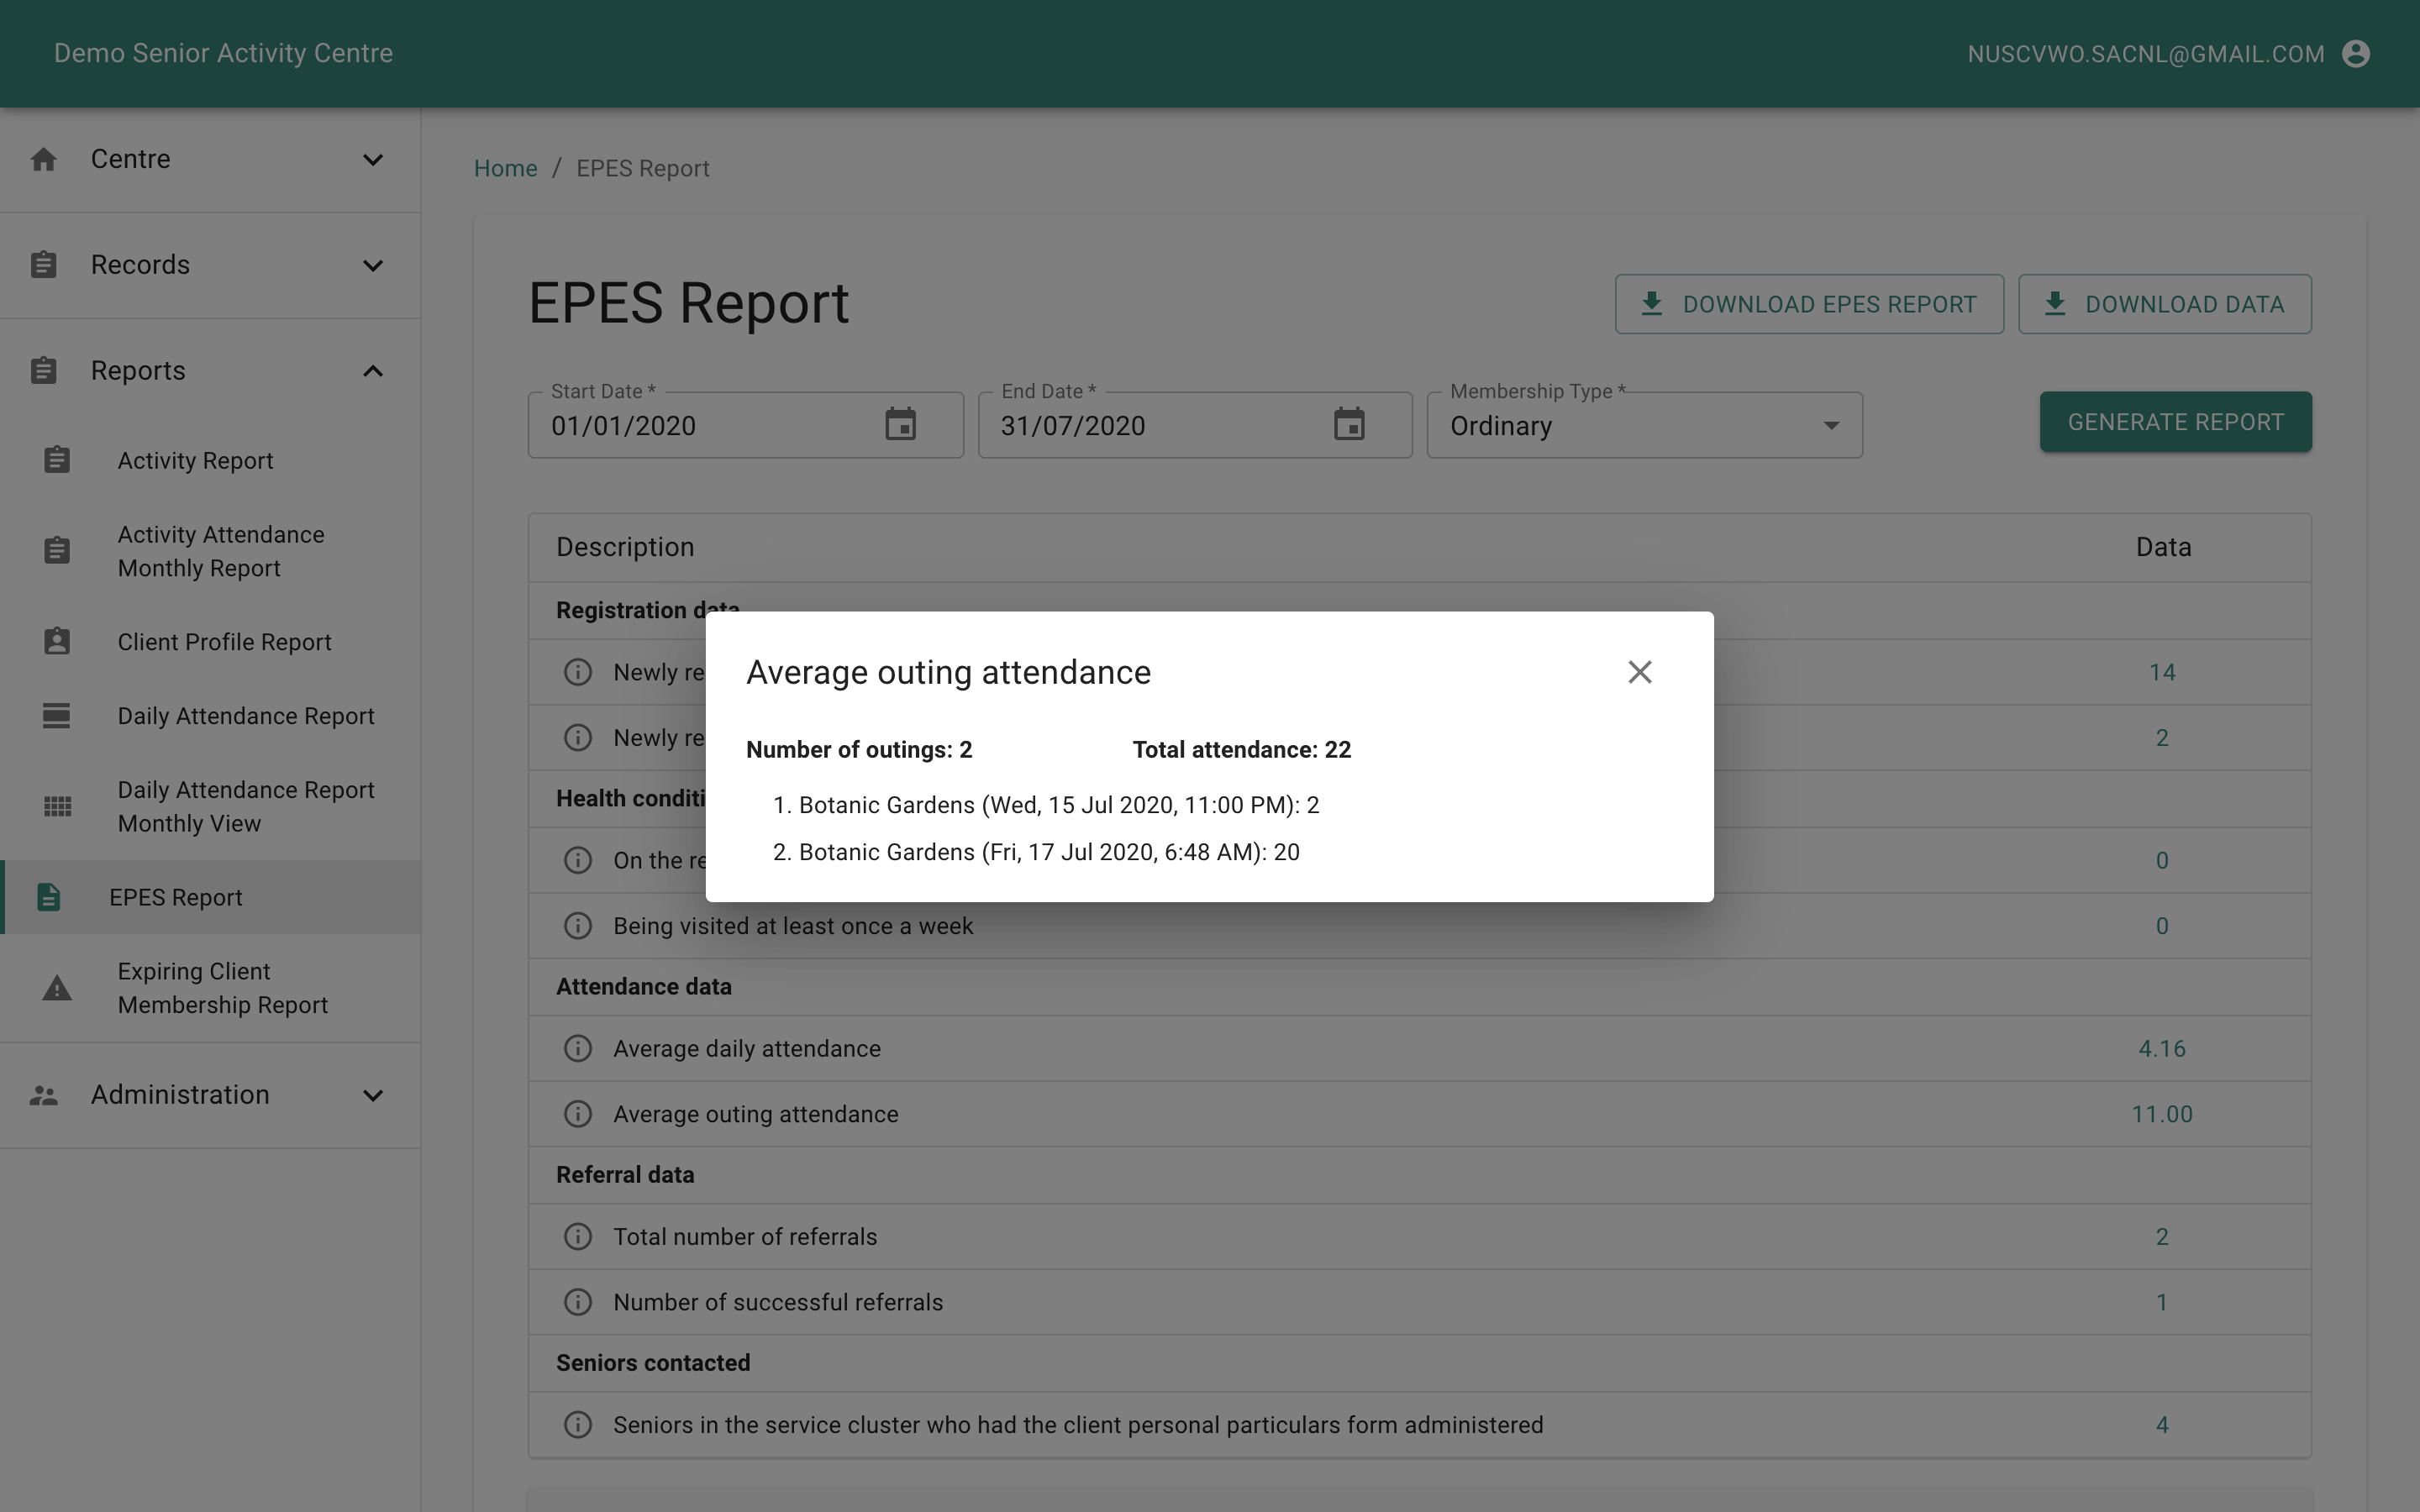 EPES Report